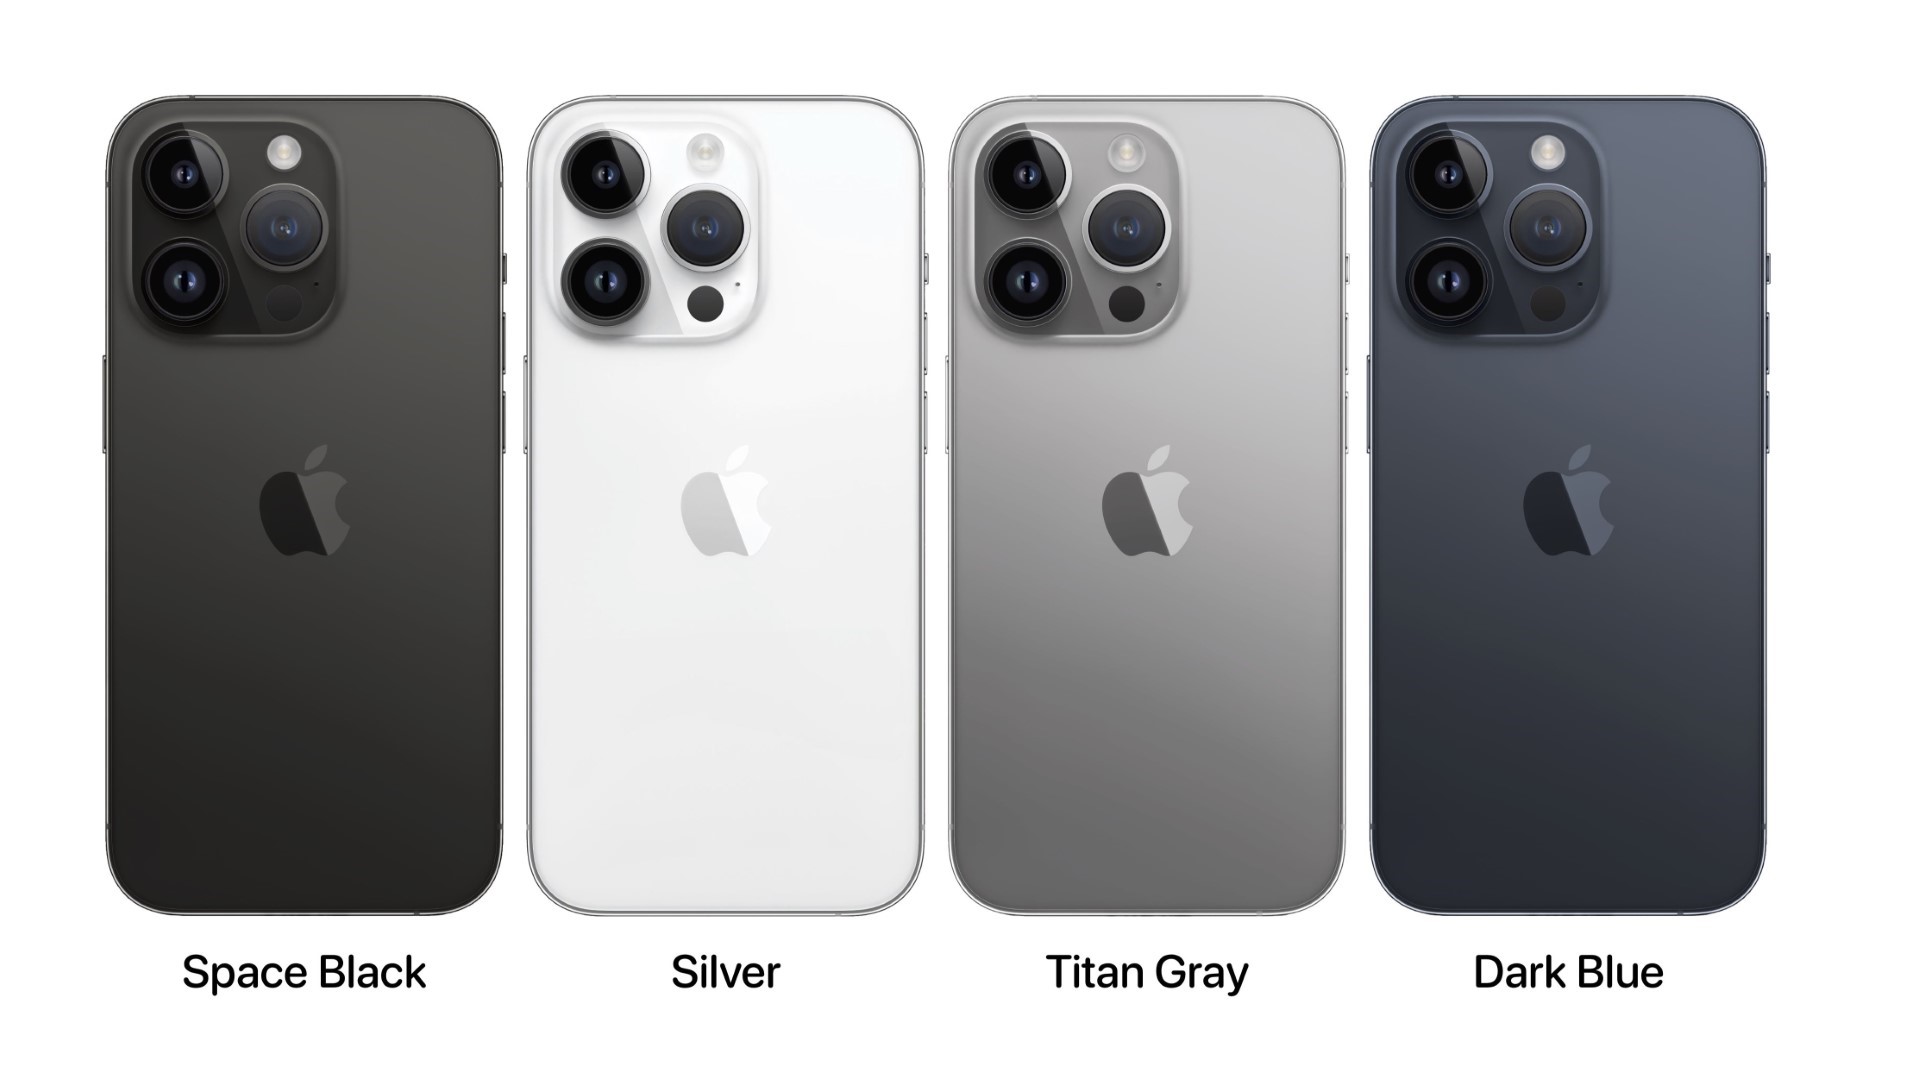 Apple iPhone 15 Pro: The new titanium gray color option should be seen for the first time in a box leak